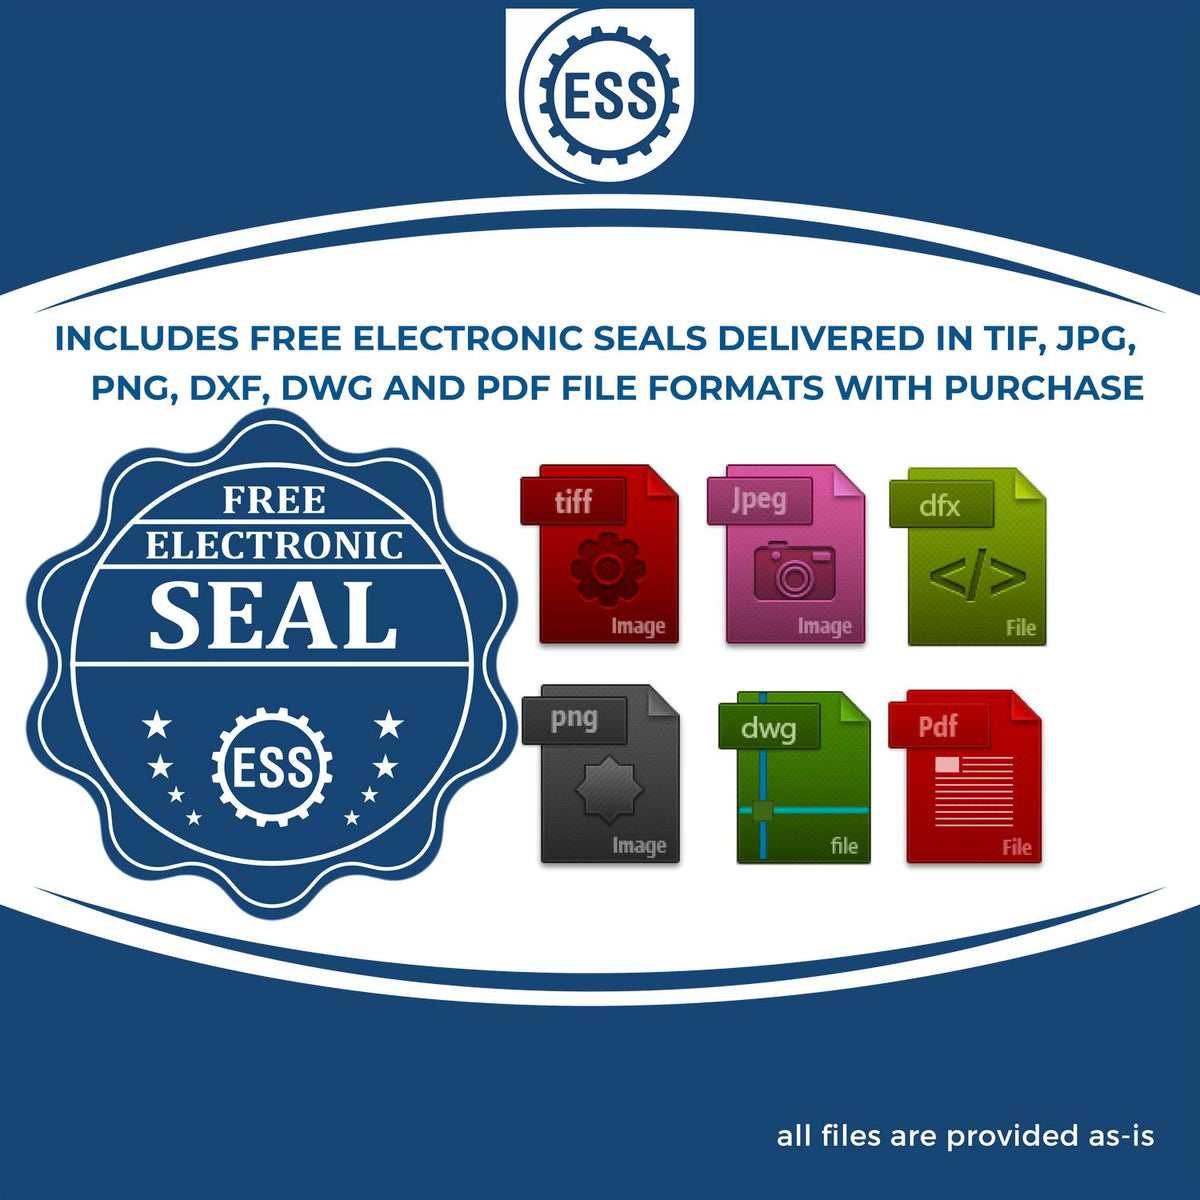 An infographic for the free electronic seal for the Gift Texas Land Surveyor Seal illustrating the different file type icons such as DXF, DWG, TIF, JPG and PNG.